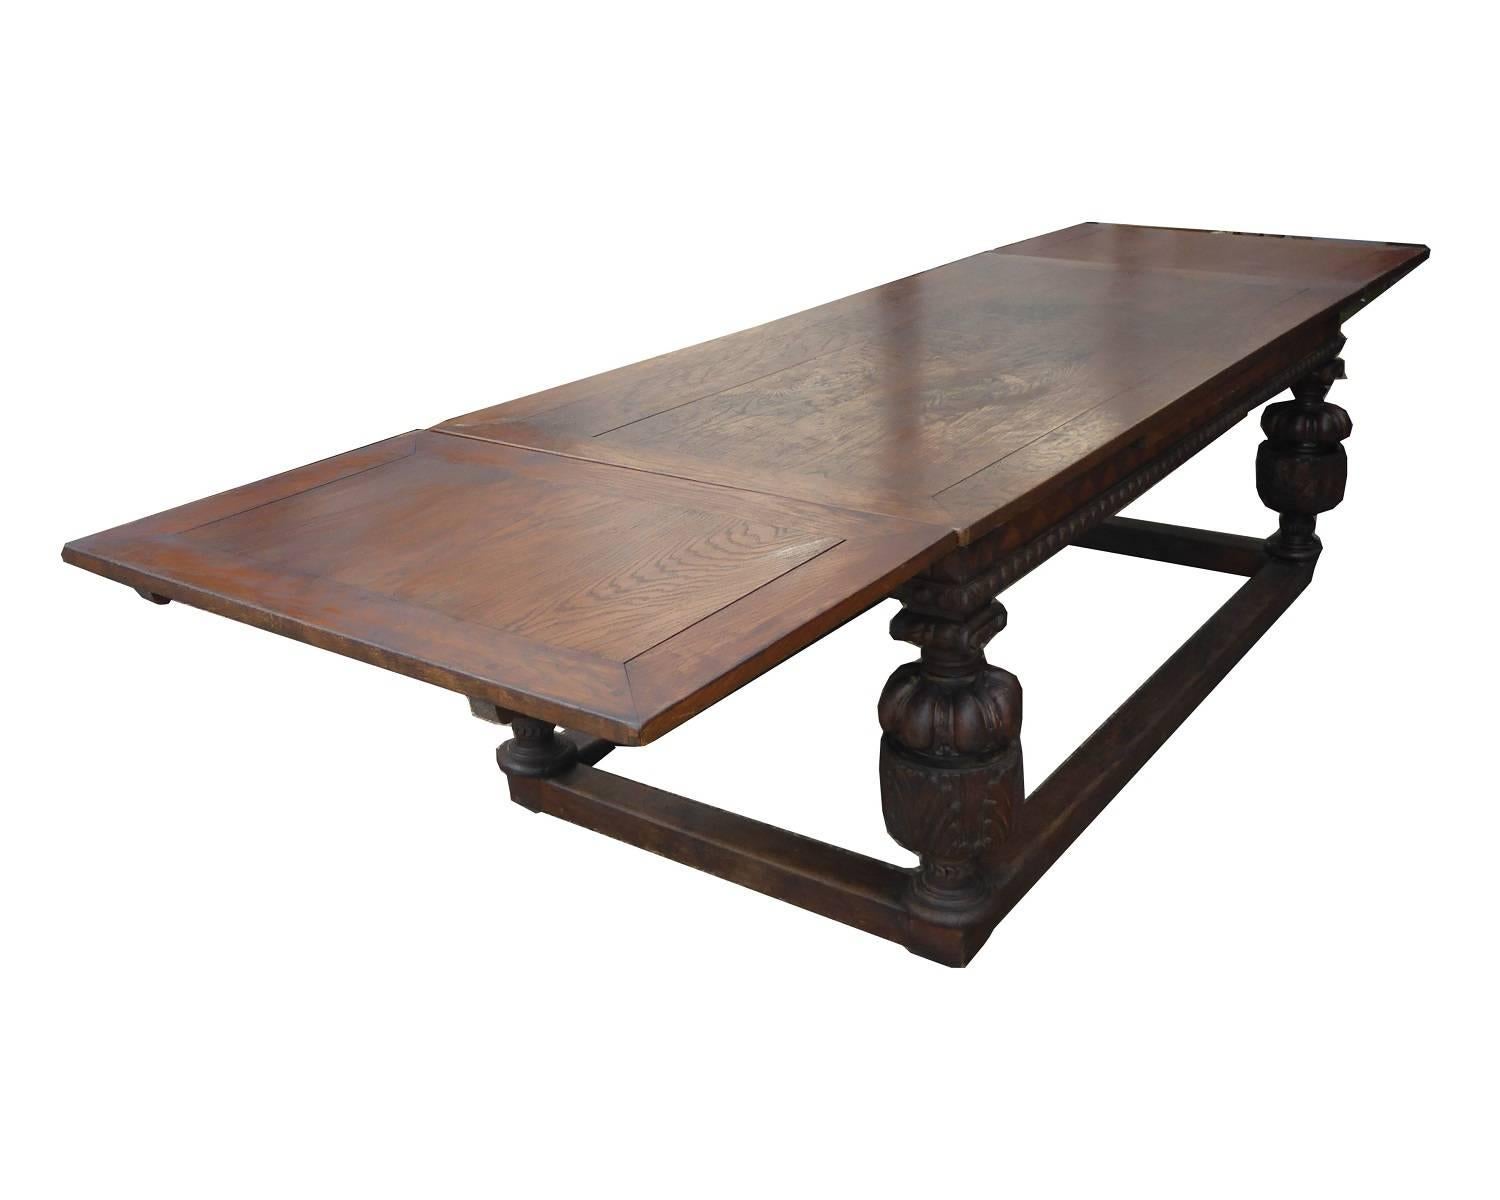 For sale is a very good quality large oak draw leaf refectory table made from solid oak. The table has nice decoration along the border, and stands on four bulbous carved legs, each supported by cross stretchers. The table has two additional leaves